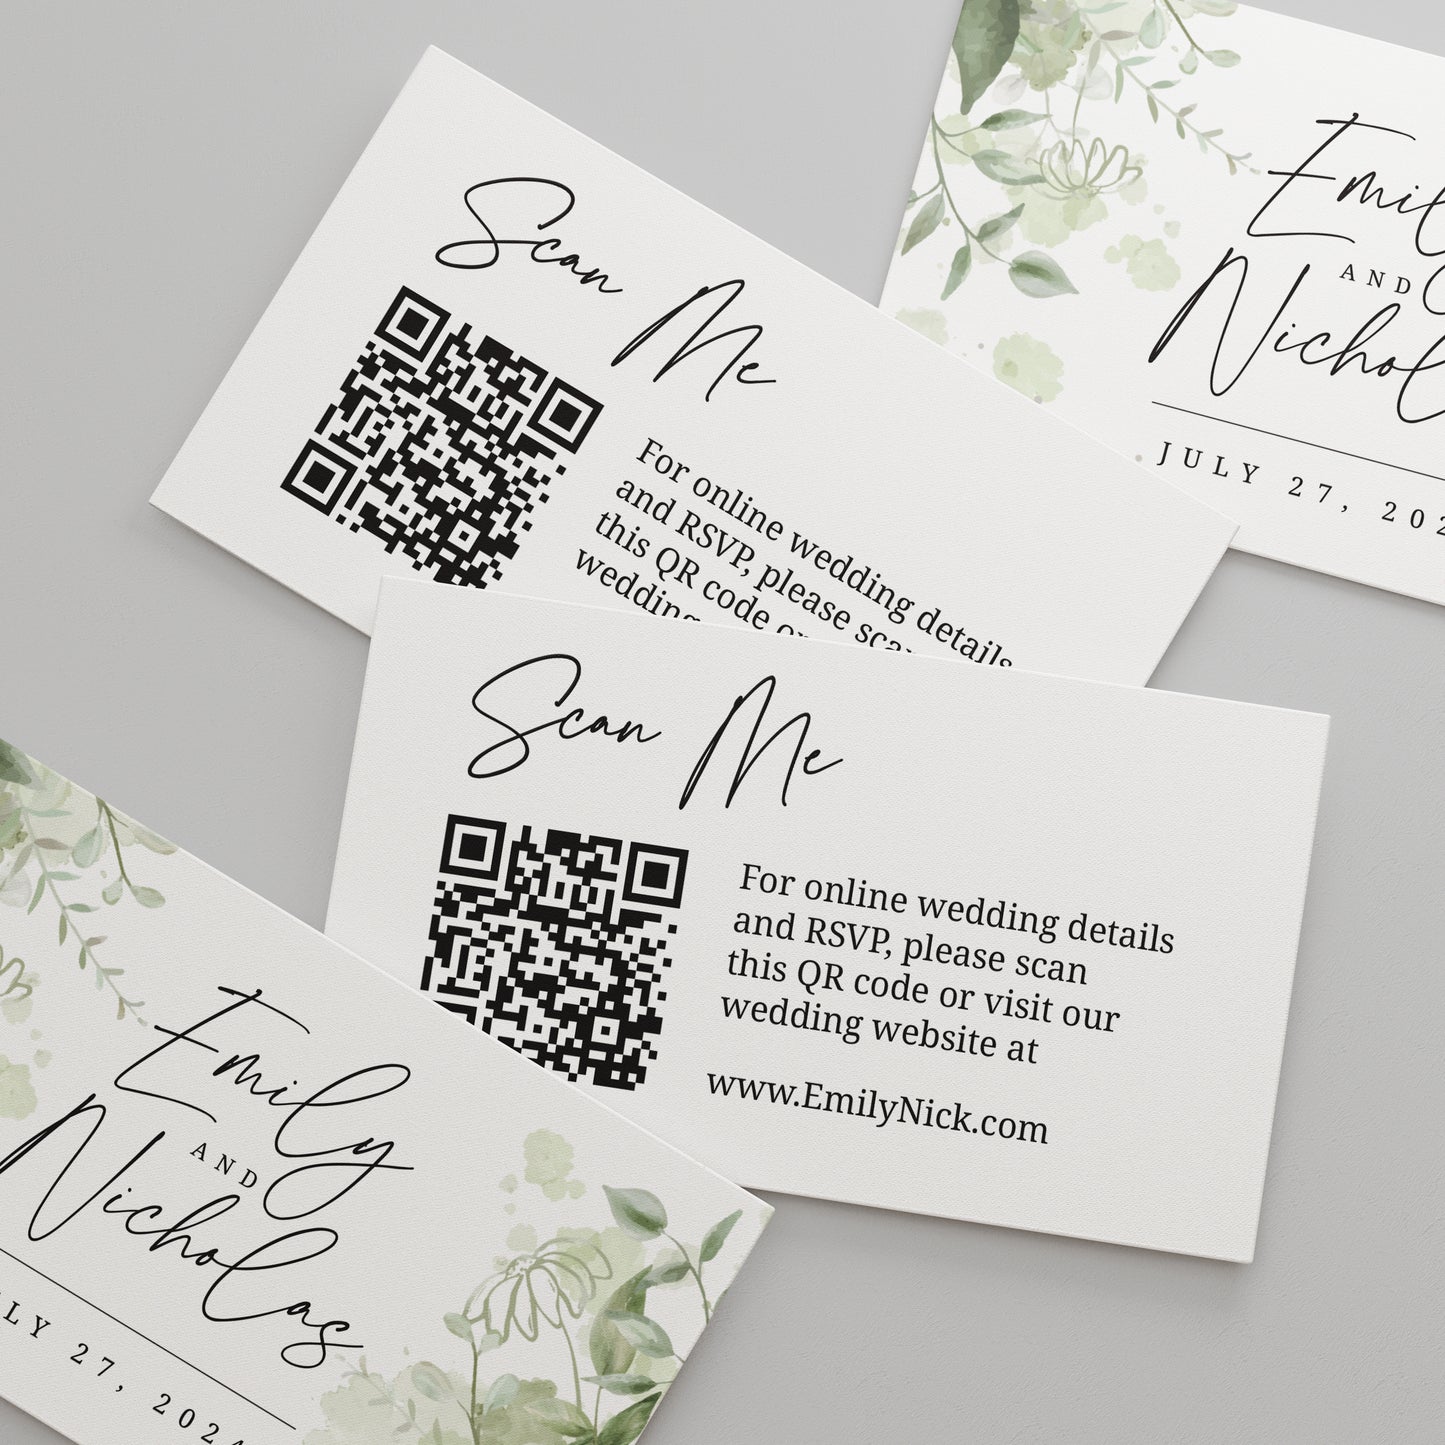 Image of Personalized Wedding Website Card with modern calligraphy and greenery floral design